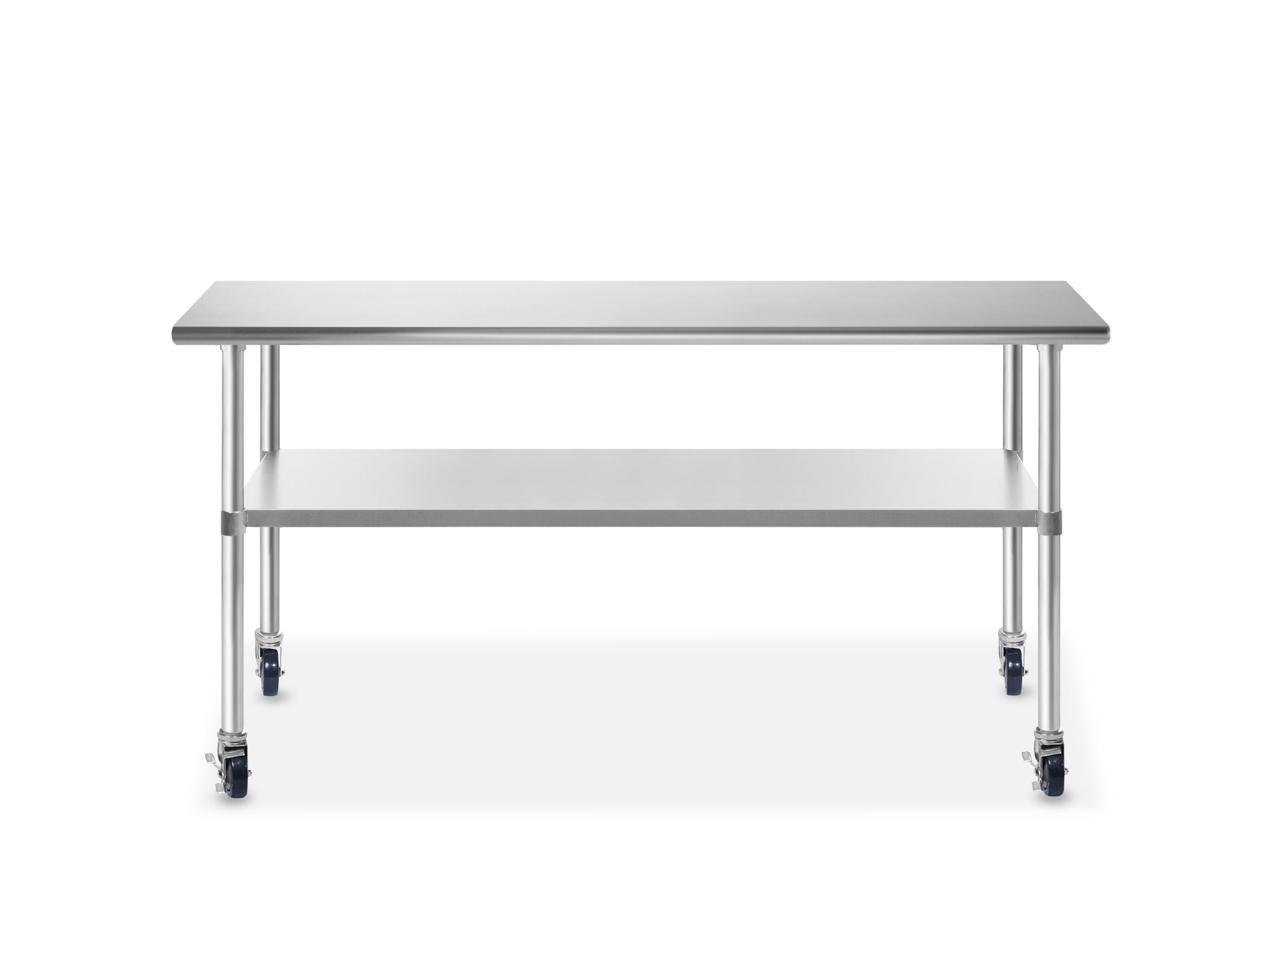 gridmann nsf stainless steel commercial kitchen prep and work table